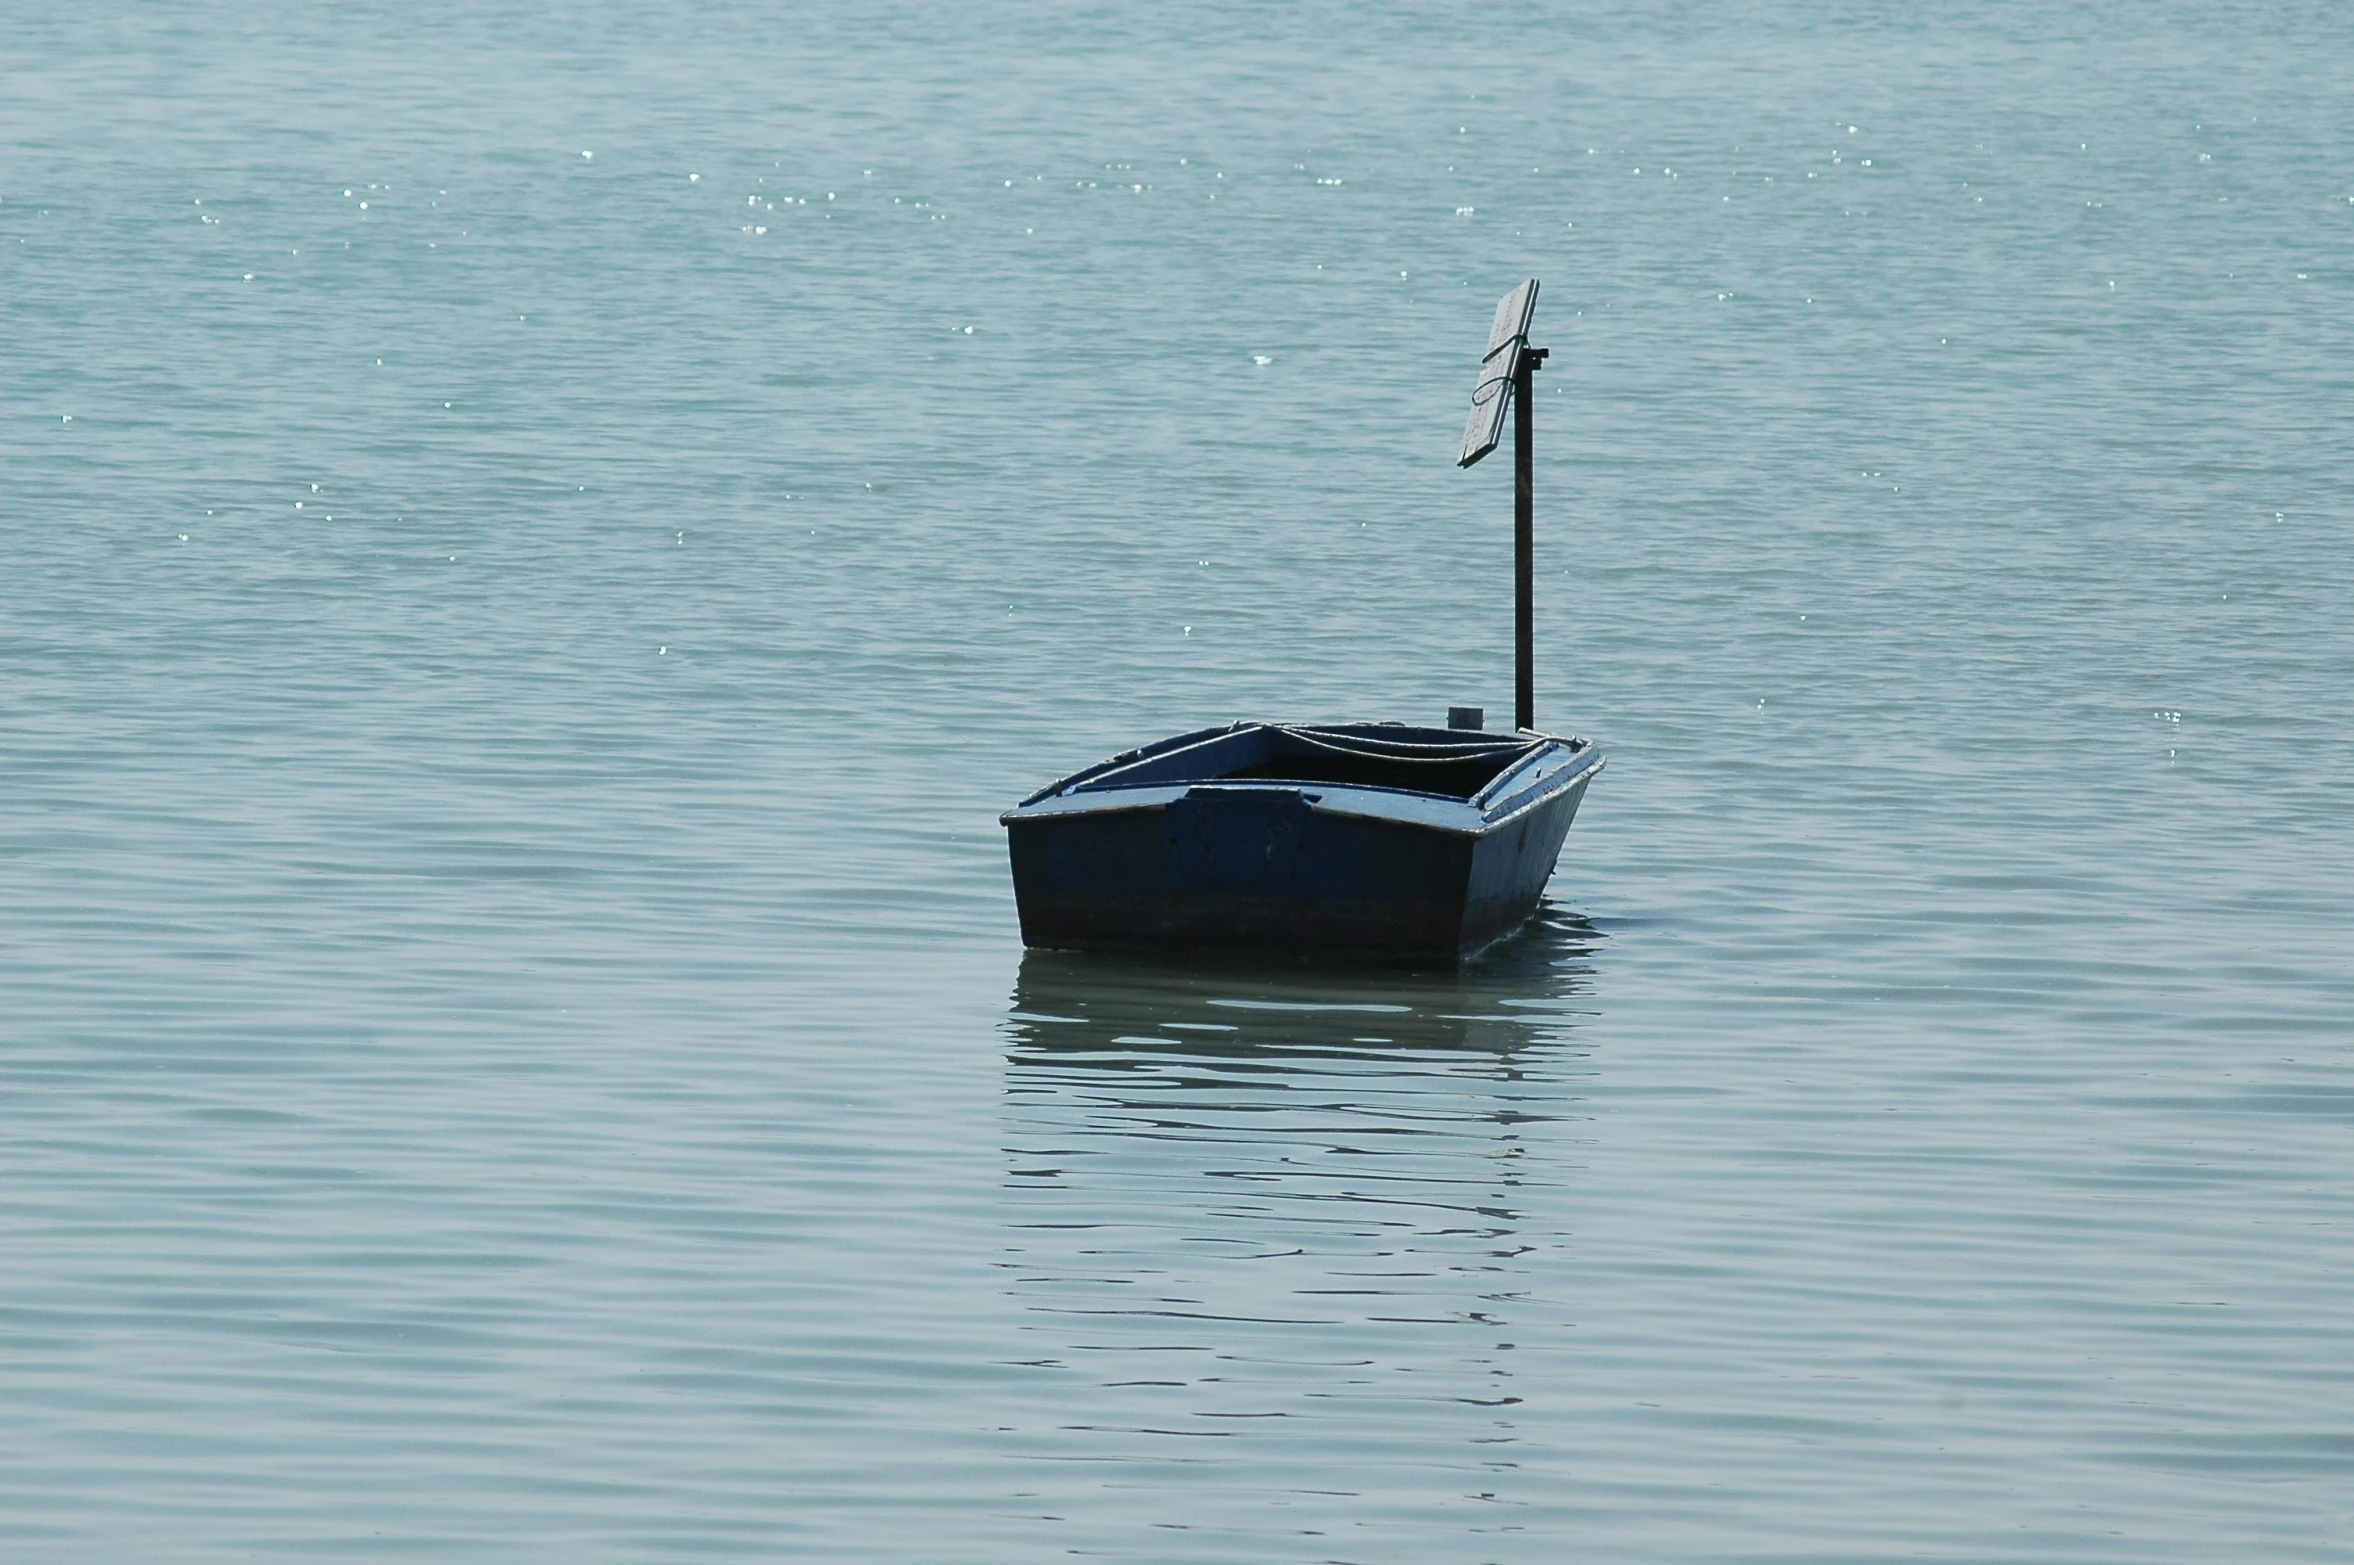 a small boat is in the calm waters